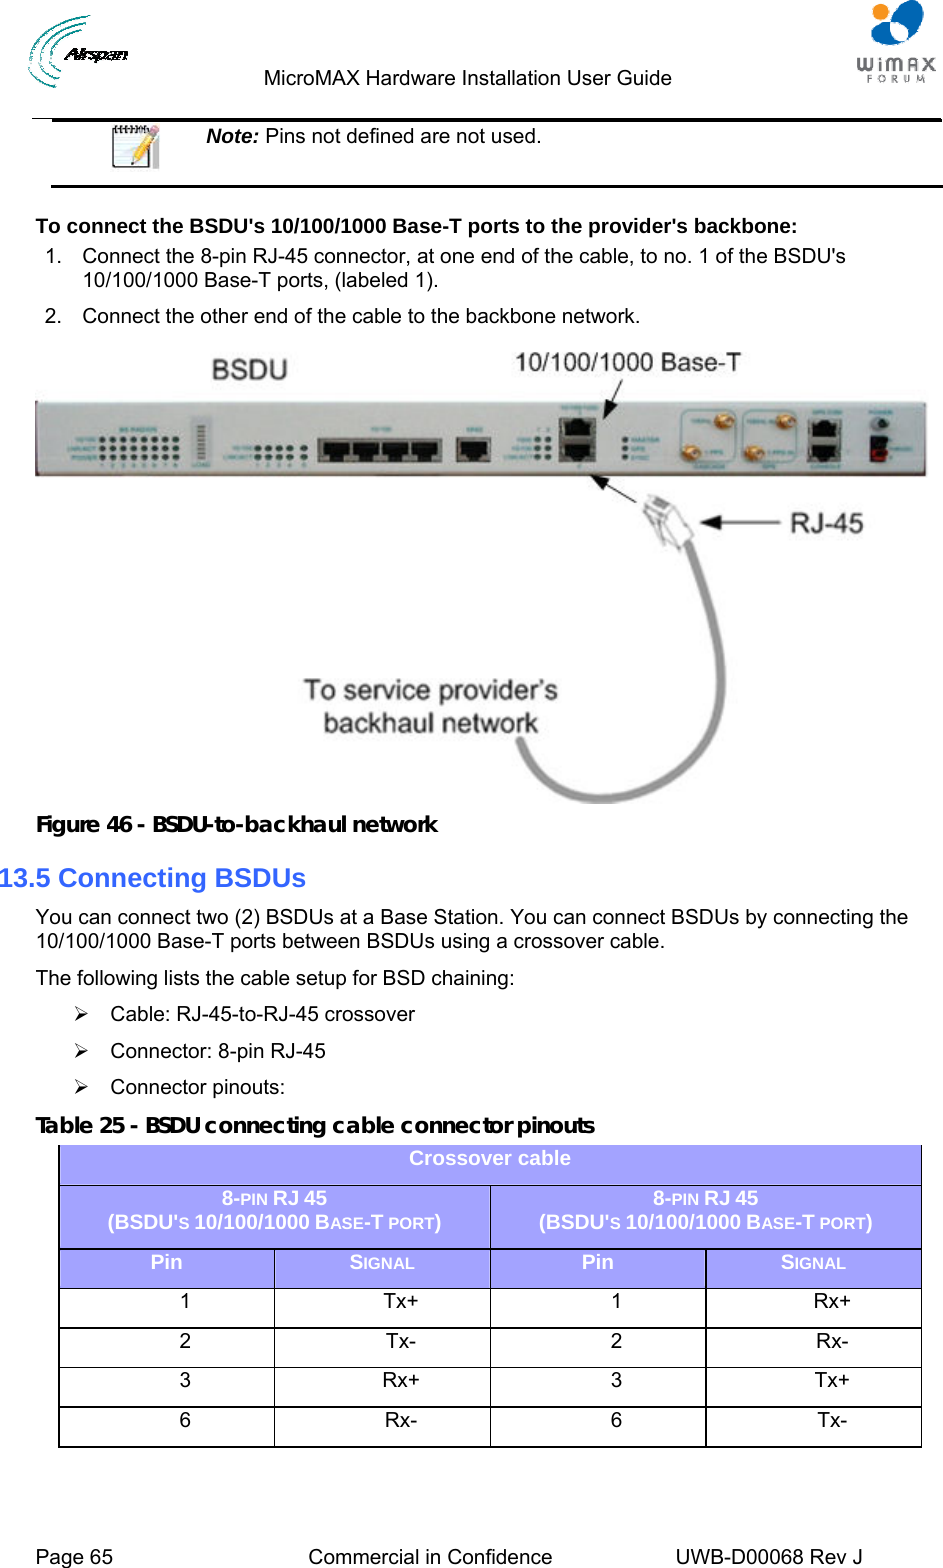                                  MicroMAX Hardware Installation User Guide     Page 65  Commercial in Confidence  UWB-D00068 Rev J    Note: Pins not defined are not used.  To connect the BSDU&apos;s 10/100/1000 Base-T ports to the provider&apos;s backbone: 1.  Connect the 8-pin RJ-45 connector, at one end of the cable, to no. 1 of the BSDU&apos;s 10/100/1000 Base-T ports, (labeled 1). 2.  Connect the other end of the cable to the backbone network.  Figure 46 - BSDU-to-backhaul network 13.5 Connecting BSDUs You can connect two (2) BSDUs at a Base Station. You can connect BSDUs by connecting the 10/100/1000 Base-T ports between BSDUs using a crossover cable. The following lists the cable setup for BSD chaining: ¾ Cable: RJ-45-to-RJ-45 crossover ¾  Connector: 8-pin RJ-45 ¾ Connector pinouts: Table 25 - BSDU connecting cable connector pinouts Crossover cable 8-PIN RJ 45 (BSDU&apos;S 10/100/1000 BASE-T PORT)  8-PIN RJ 45 (BSDU&apos;S 10/100/1000 BASE-T PORT) Pin  SIGNAL Pin  SIGNAL 1 Tx+ 1 Rx+ 2 Tx- 2 Rx- 3 Rx+ 3 Tx+ 6 Rx- 6 Tx-  